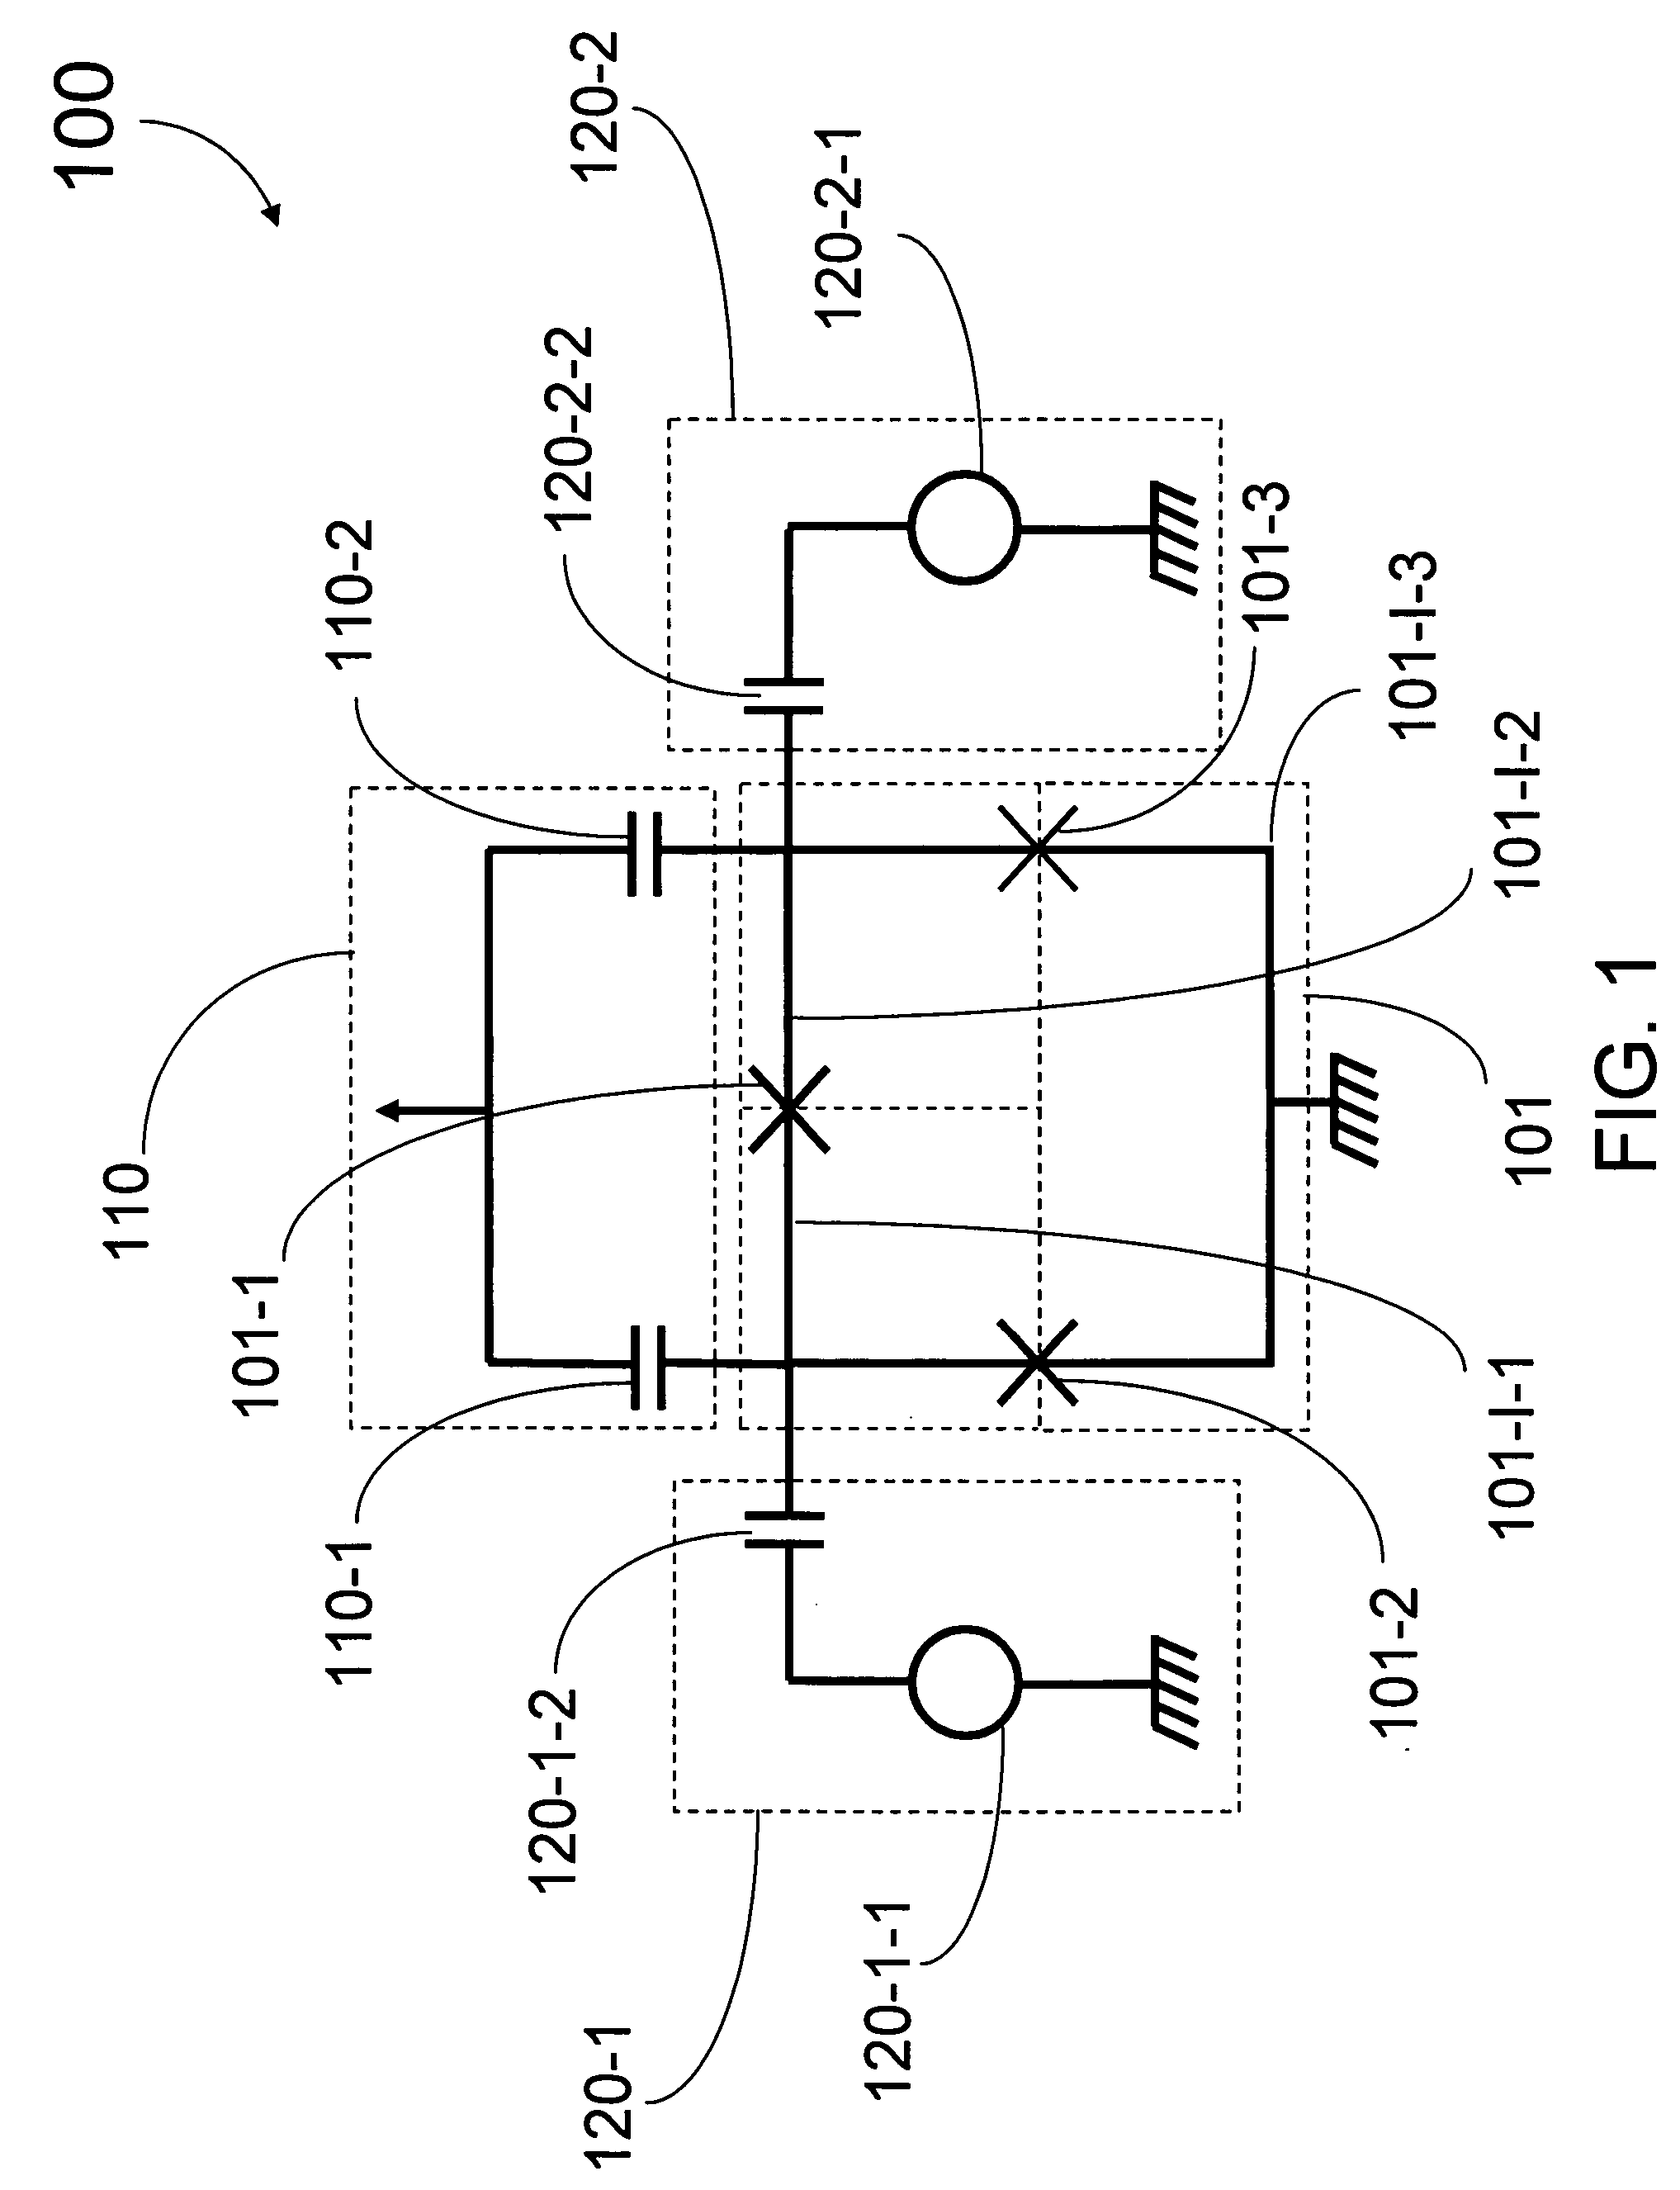 Superconducting qubits having a plurality of capacitive couplings